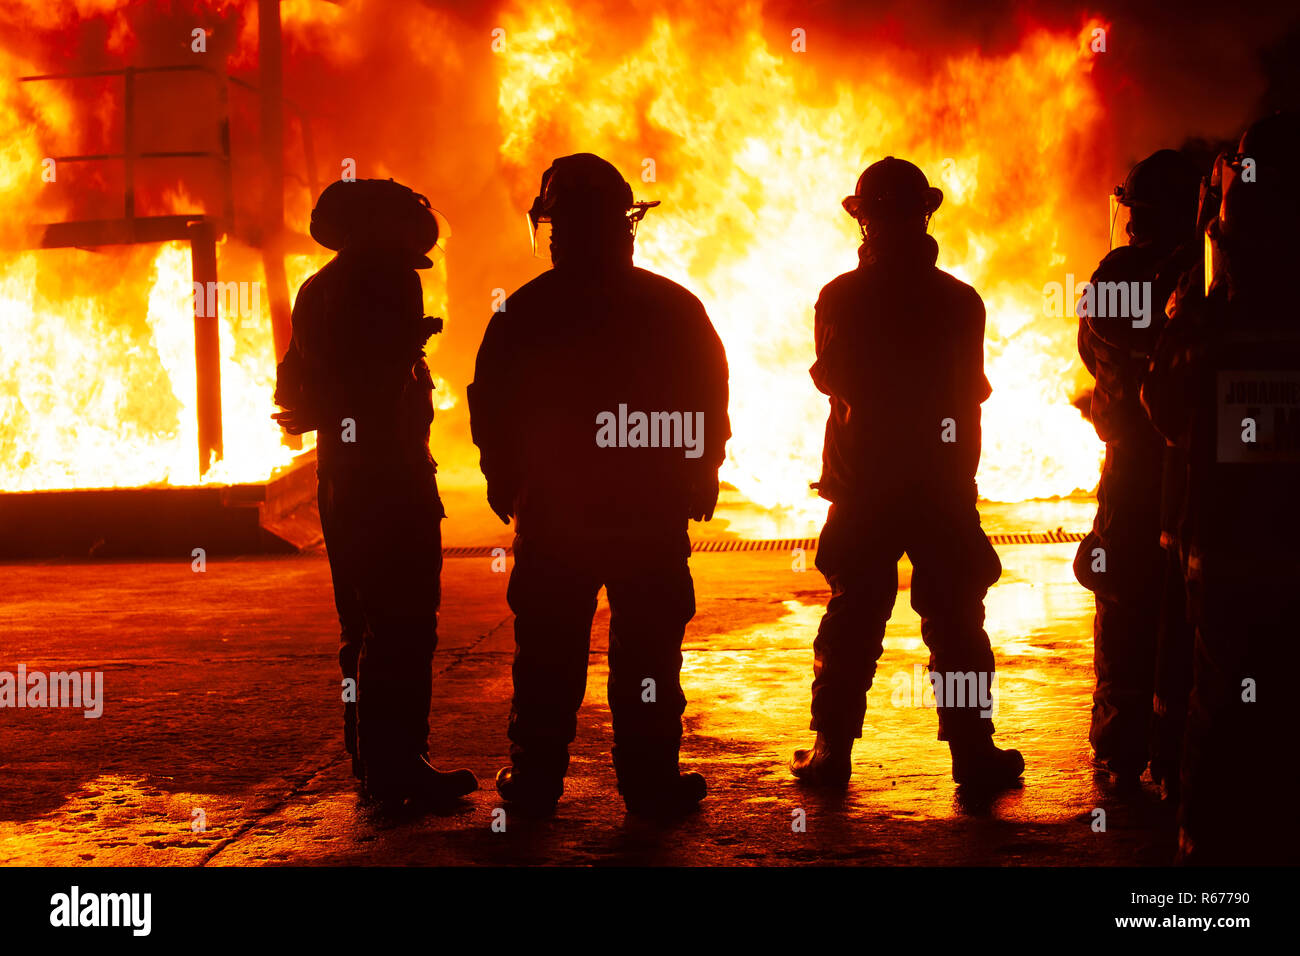 JOHANNESBURG, SOUTH AFRICA - OCTOBER, 2018 Firefighters spraying down fire during firefighting training exercise Stock Photo